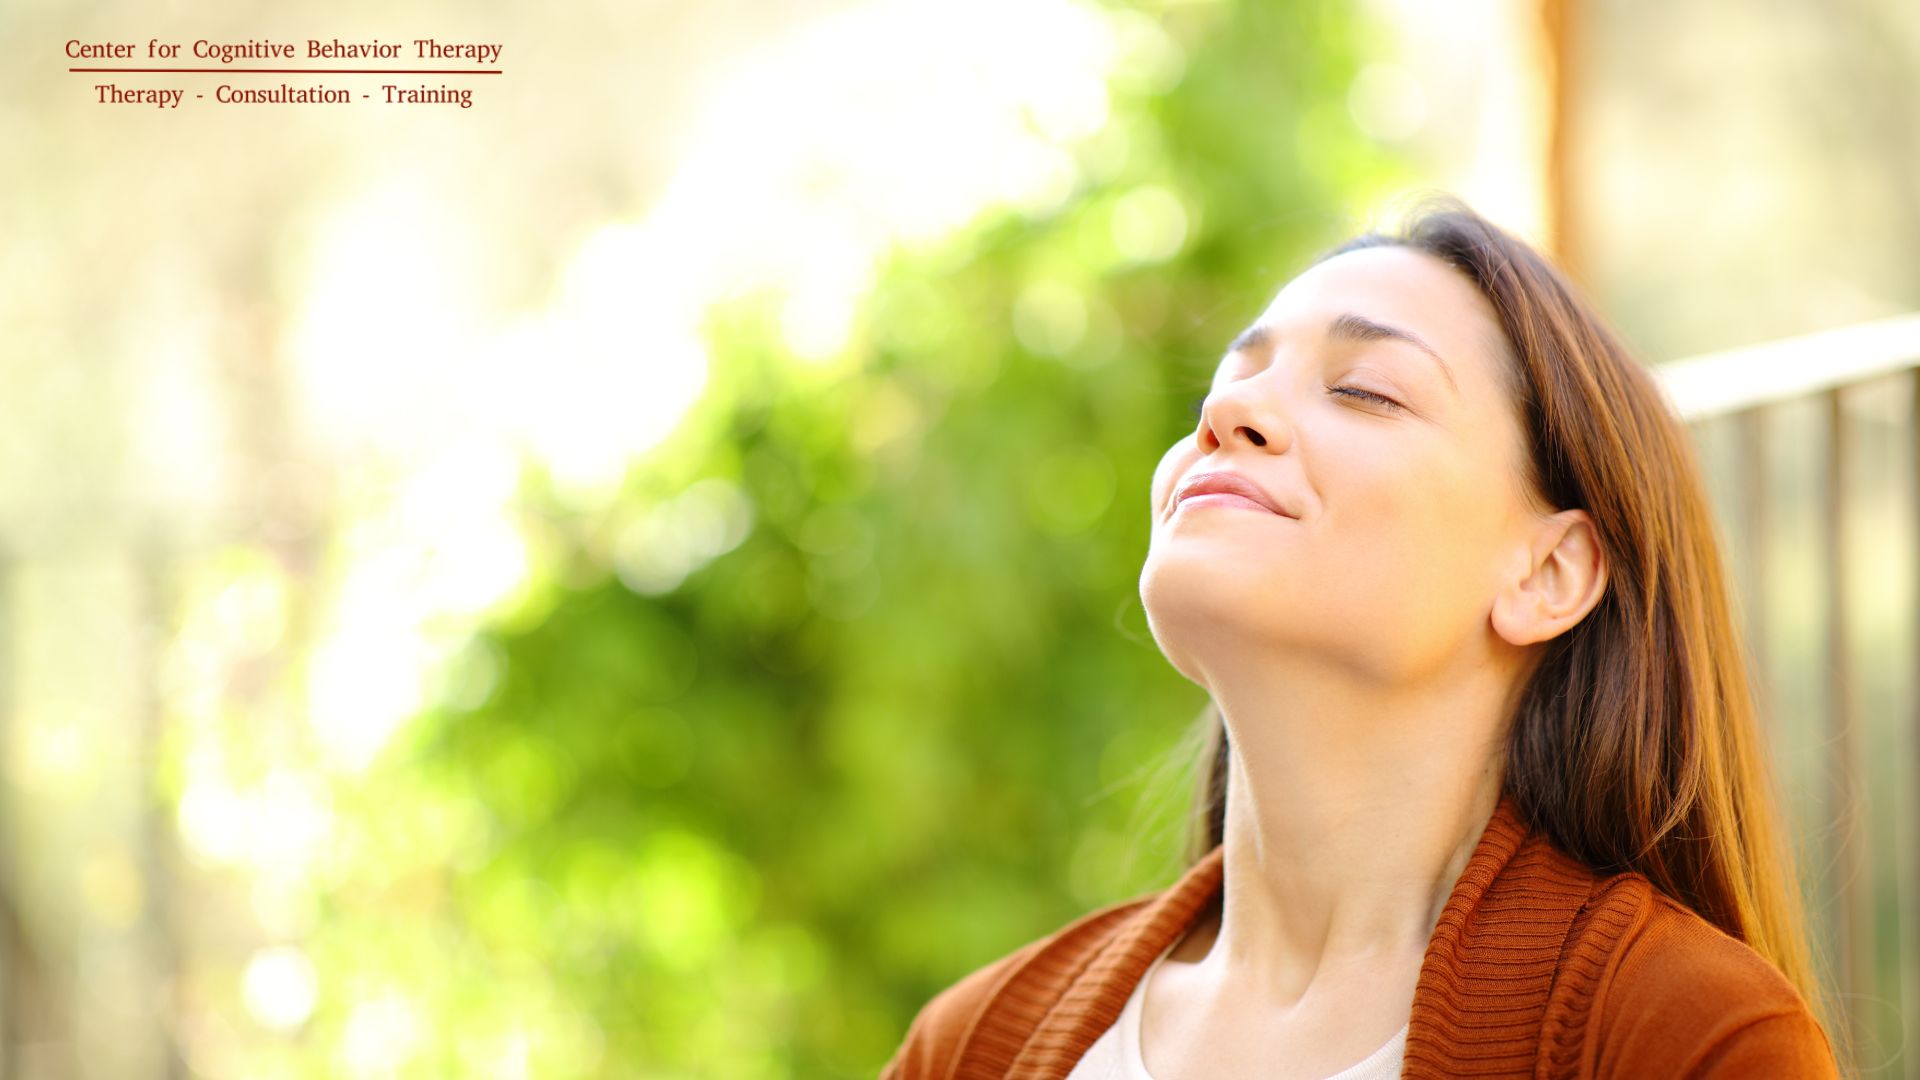 Person practicing self-soothe deep breathing in a serene natural environment.